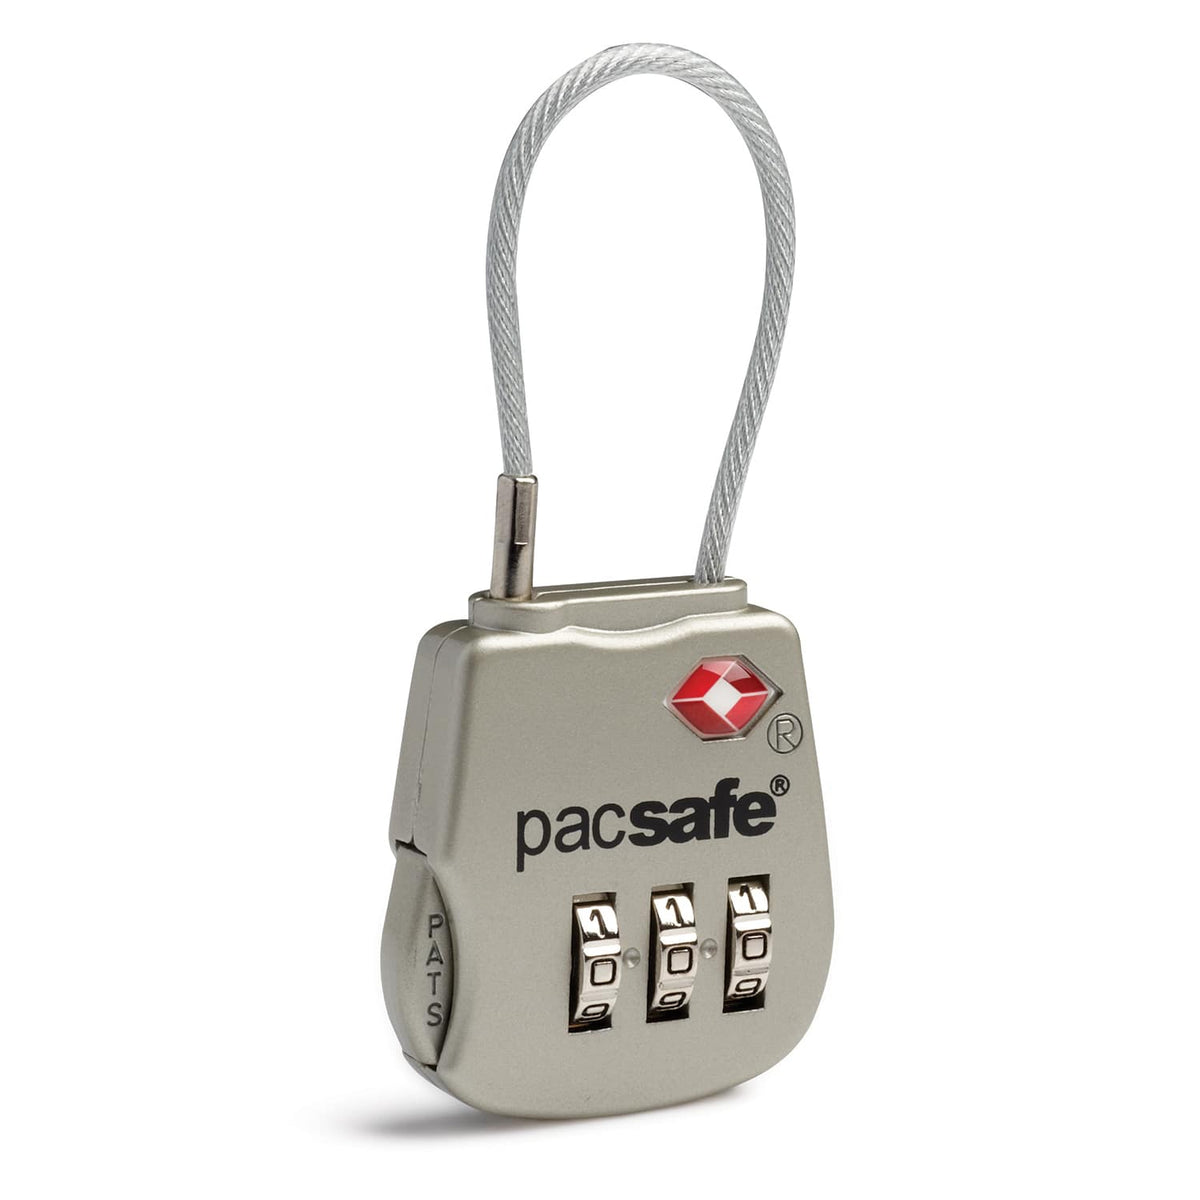 Pacsafe ProSafe 800 secure TSA-approved 3-dial cable lock